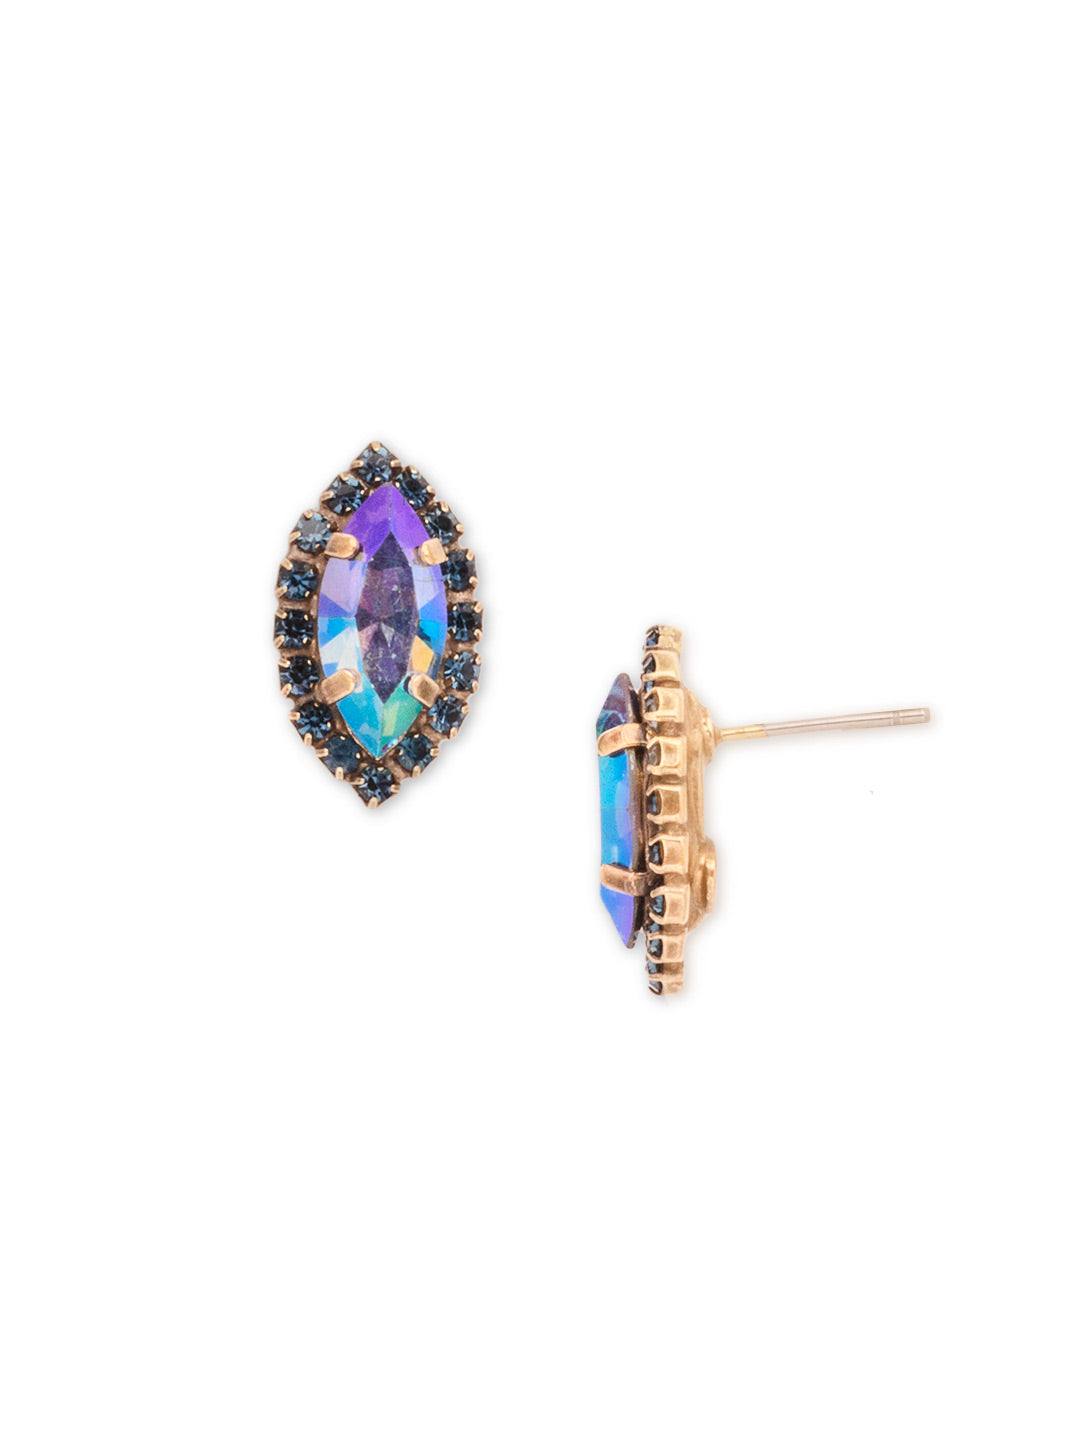 Giselle Stud Earring - EFC81AGVBN - <p>The Giselle Stud Earrings feature a navette halo cut crystal on a post. From Sorrelli's Venice Blue collection in our Antique Gold-tone finish.</p>